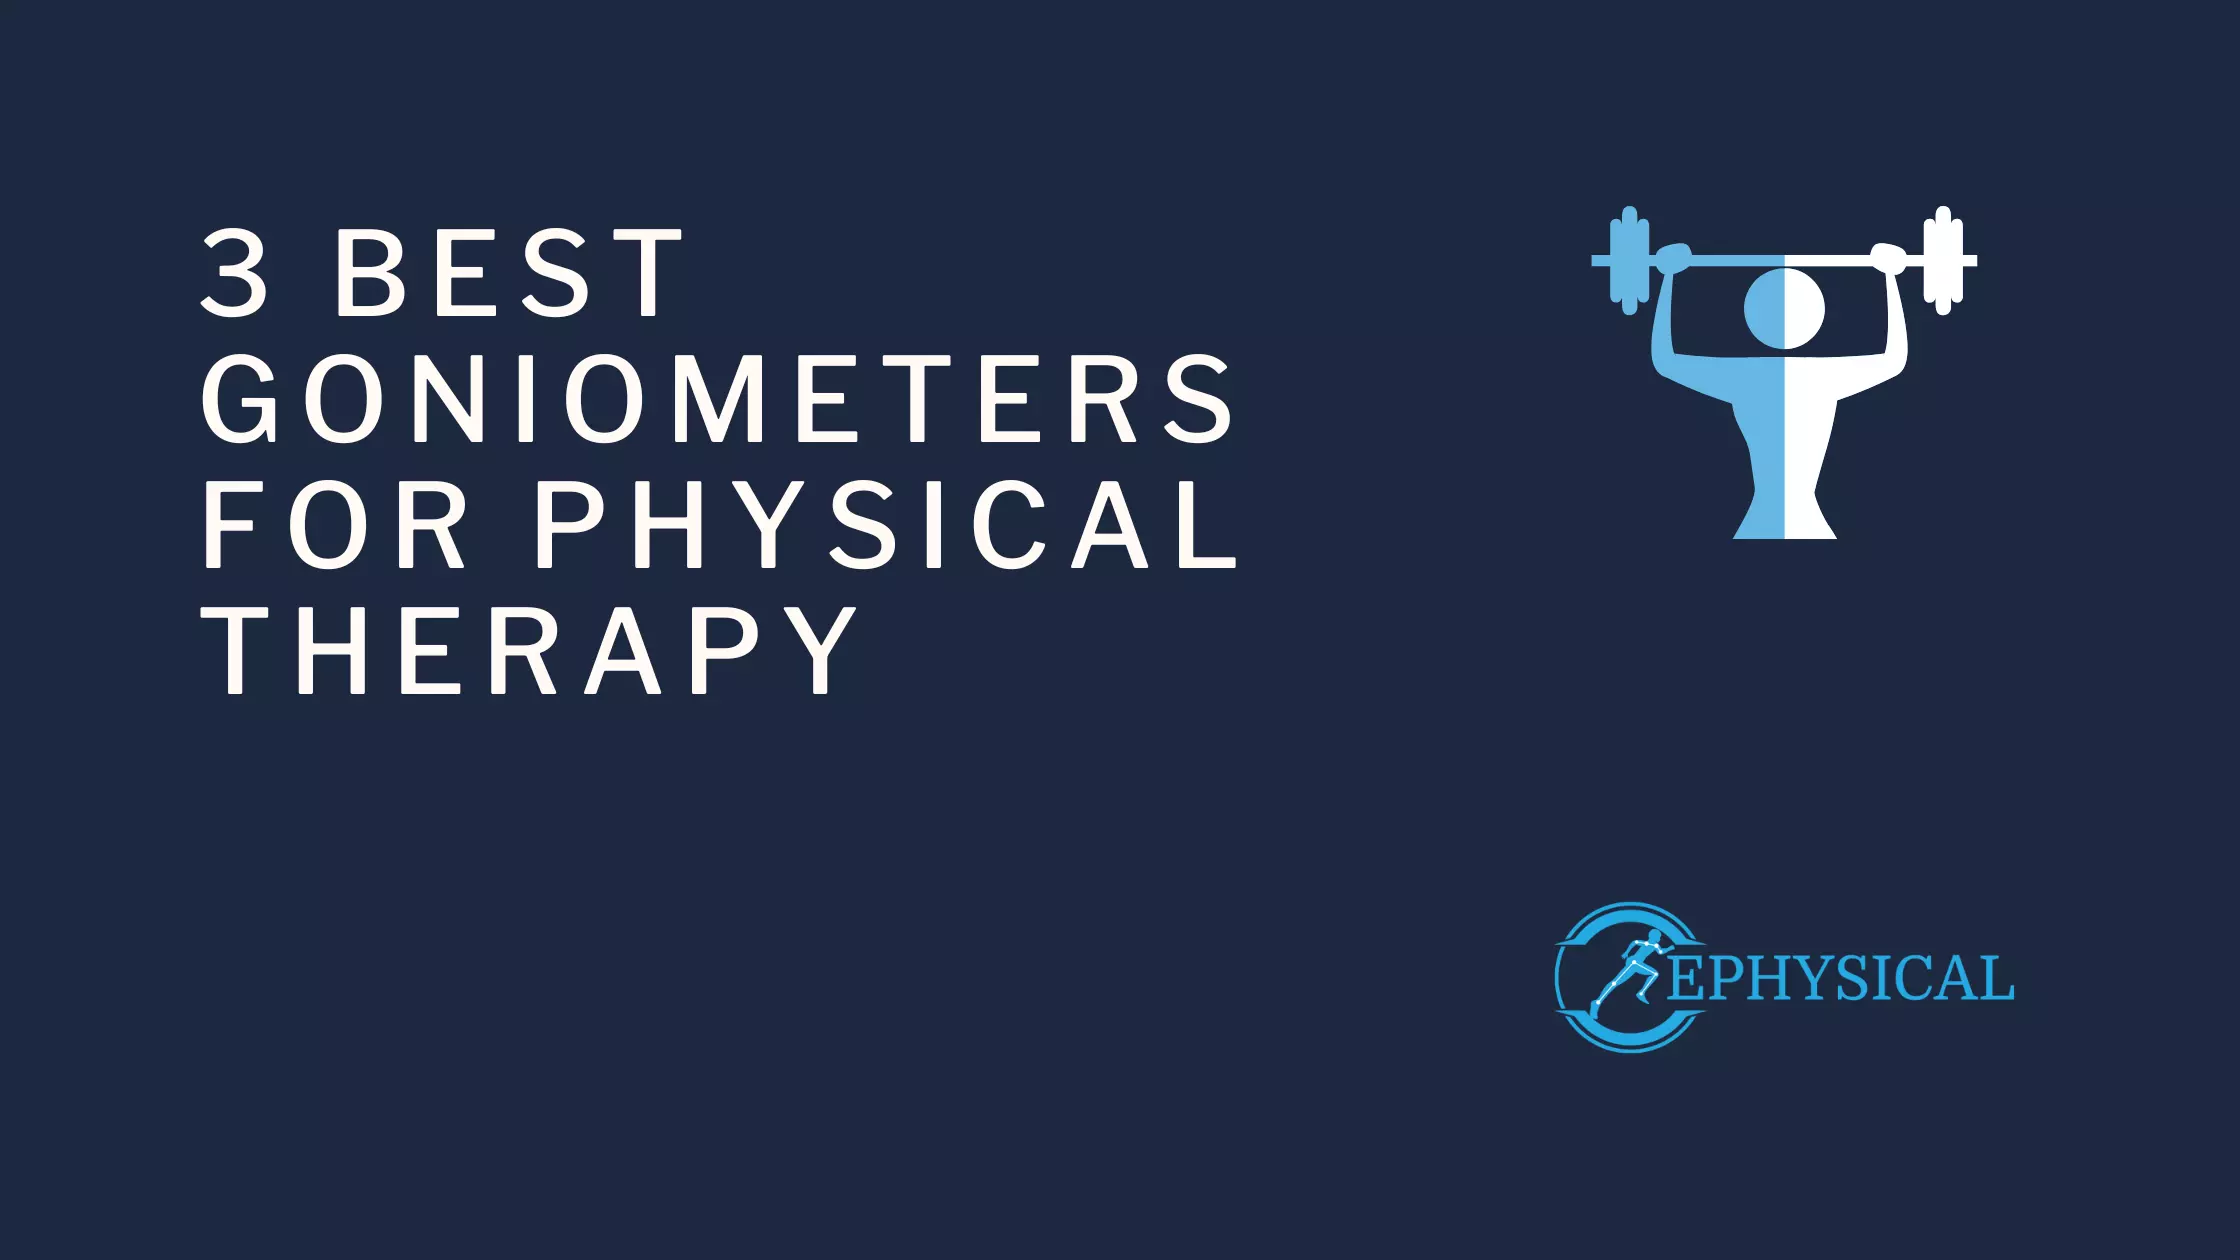 3 Best Goniometer for Physical Therapy